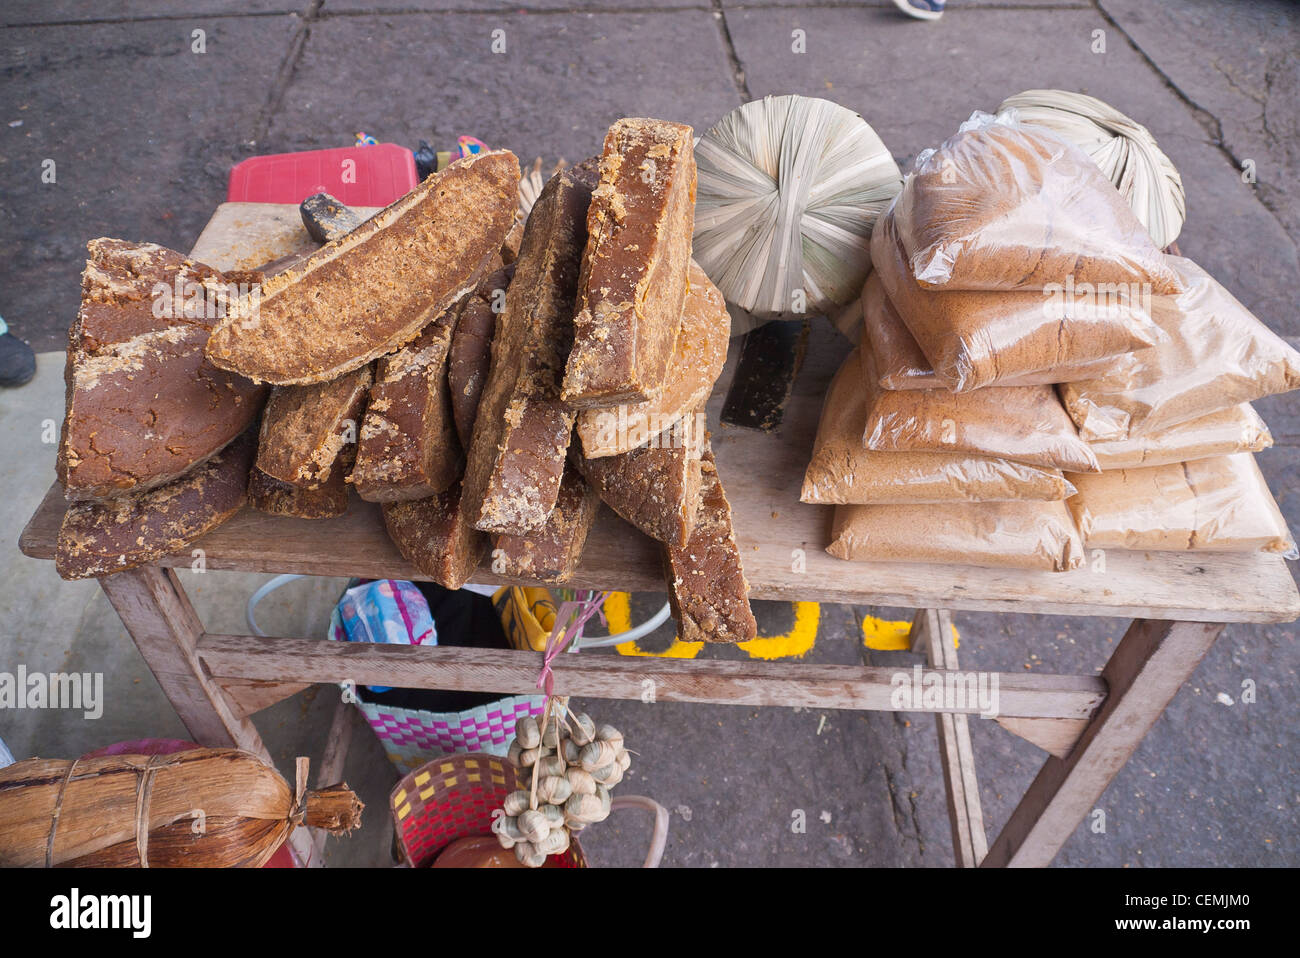 Molded brown sugar, panela, on display for sale at the market in Pujili, Ecuador. Stock Photo